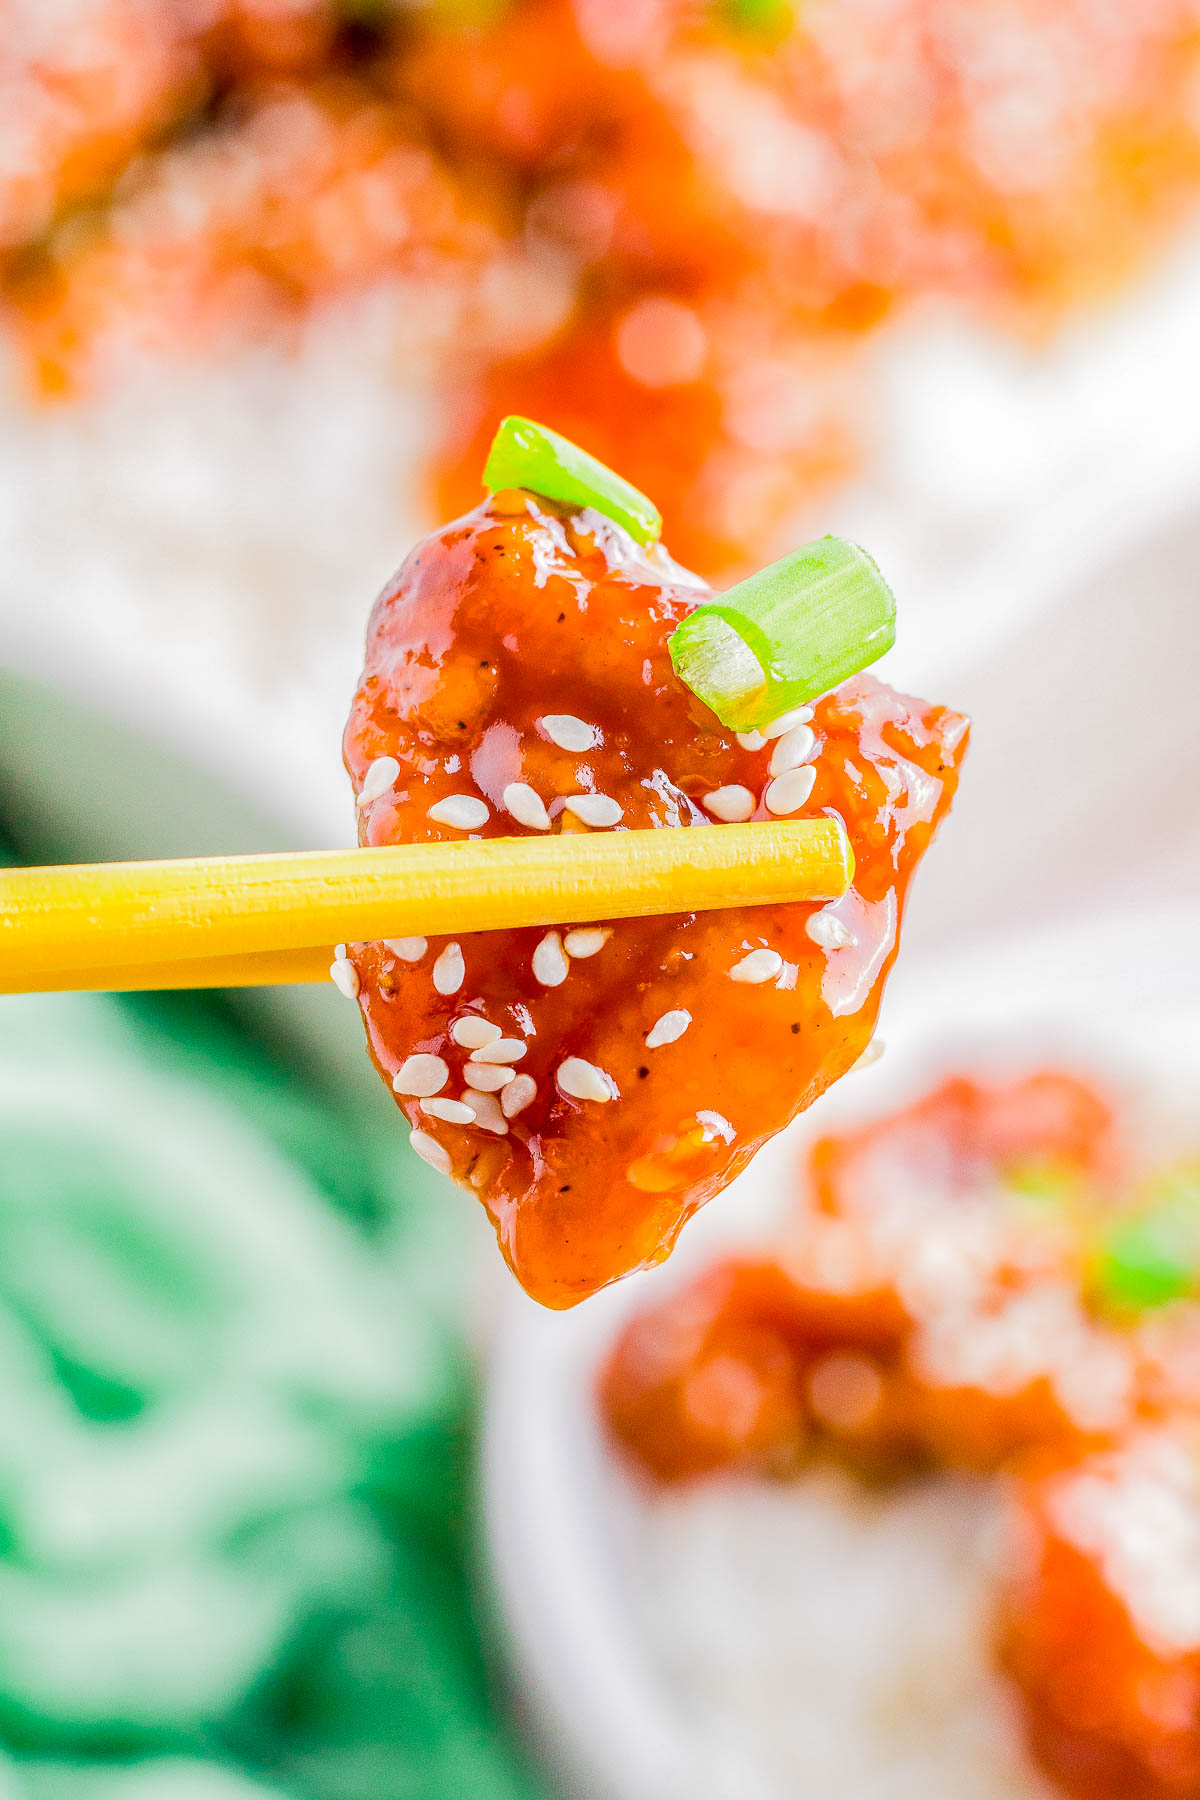 Chopsticks holding a piece of sesame chicken coated in a glossy red sauce, sprinkled with sesame seeds and garnished with green onions.